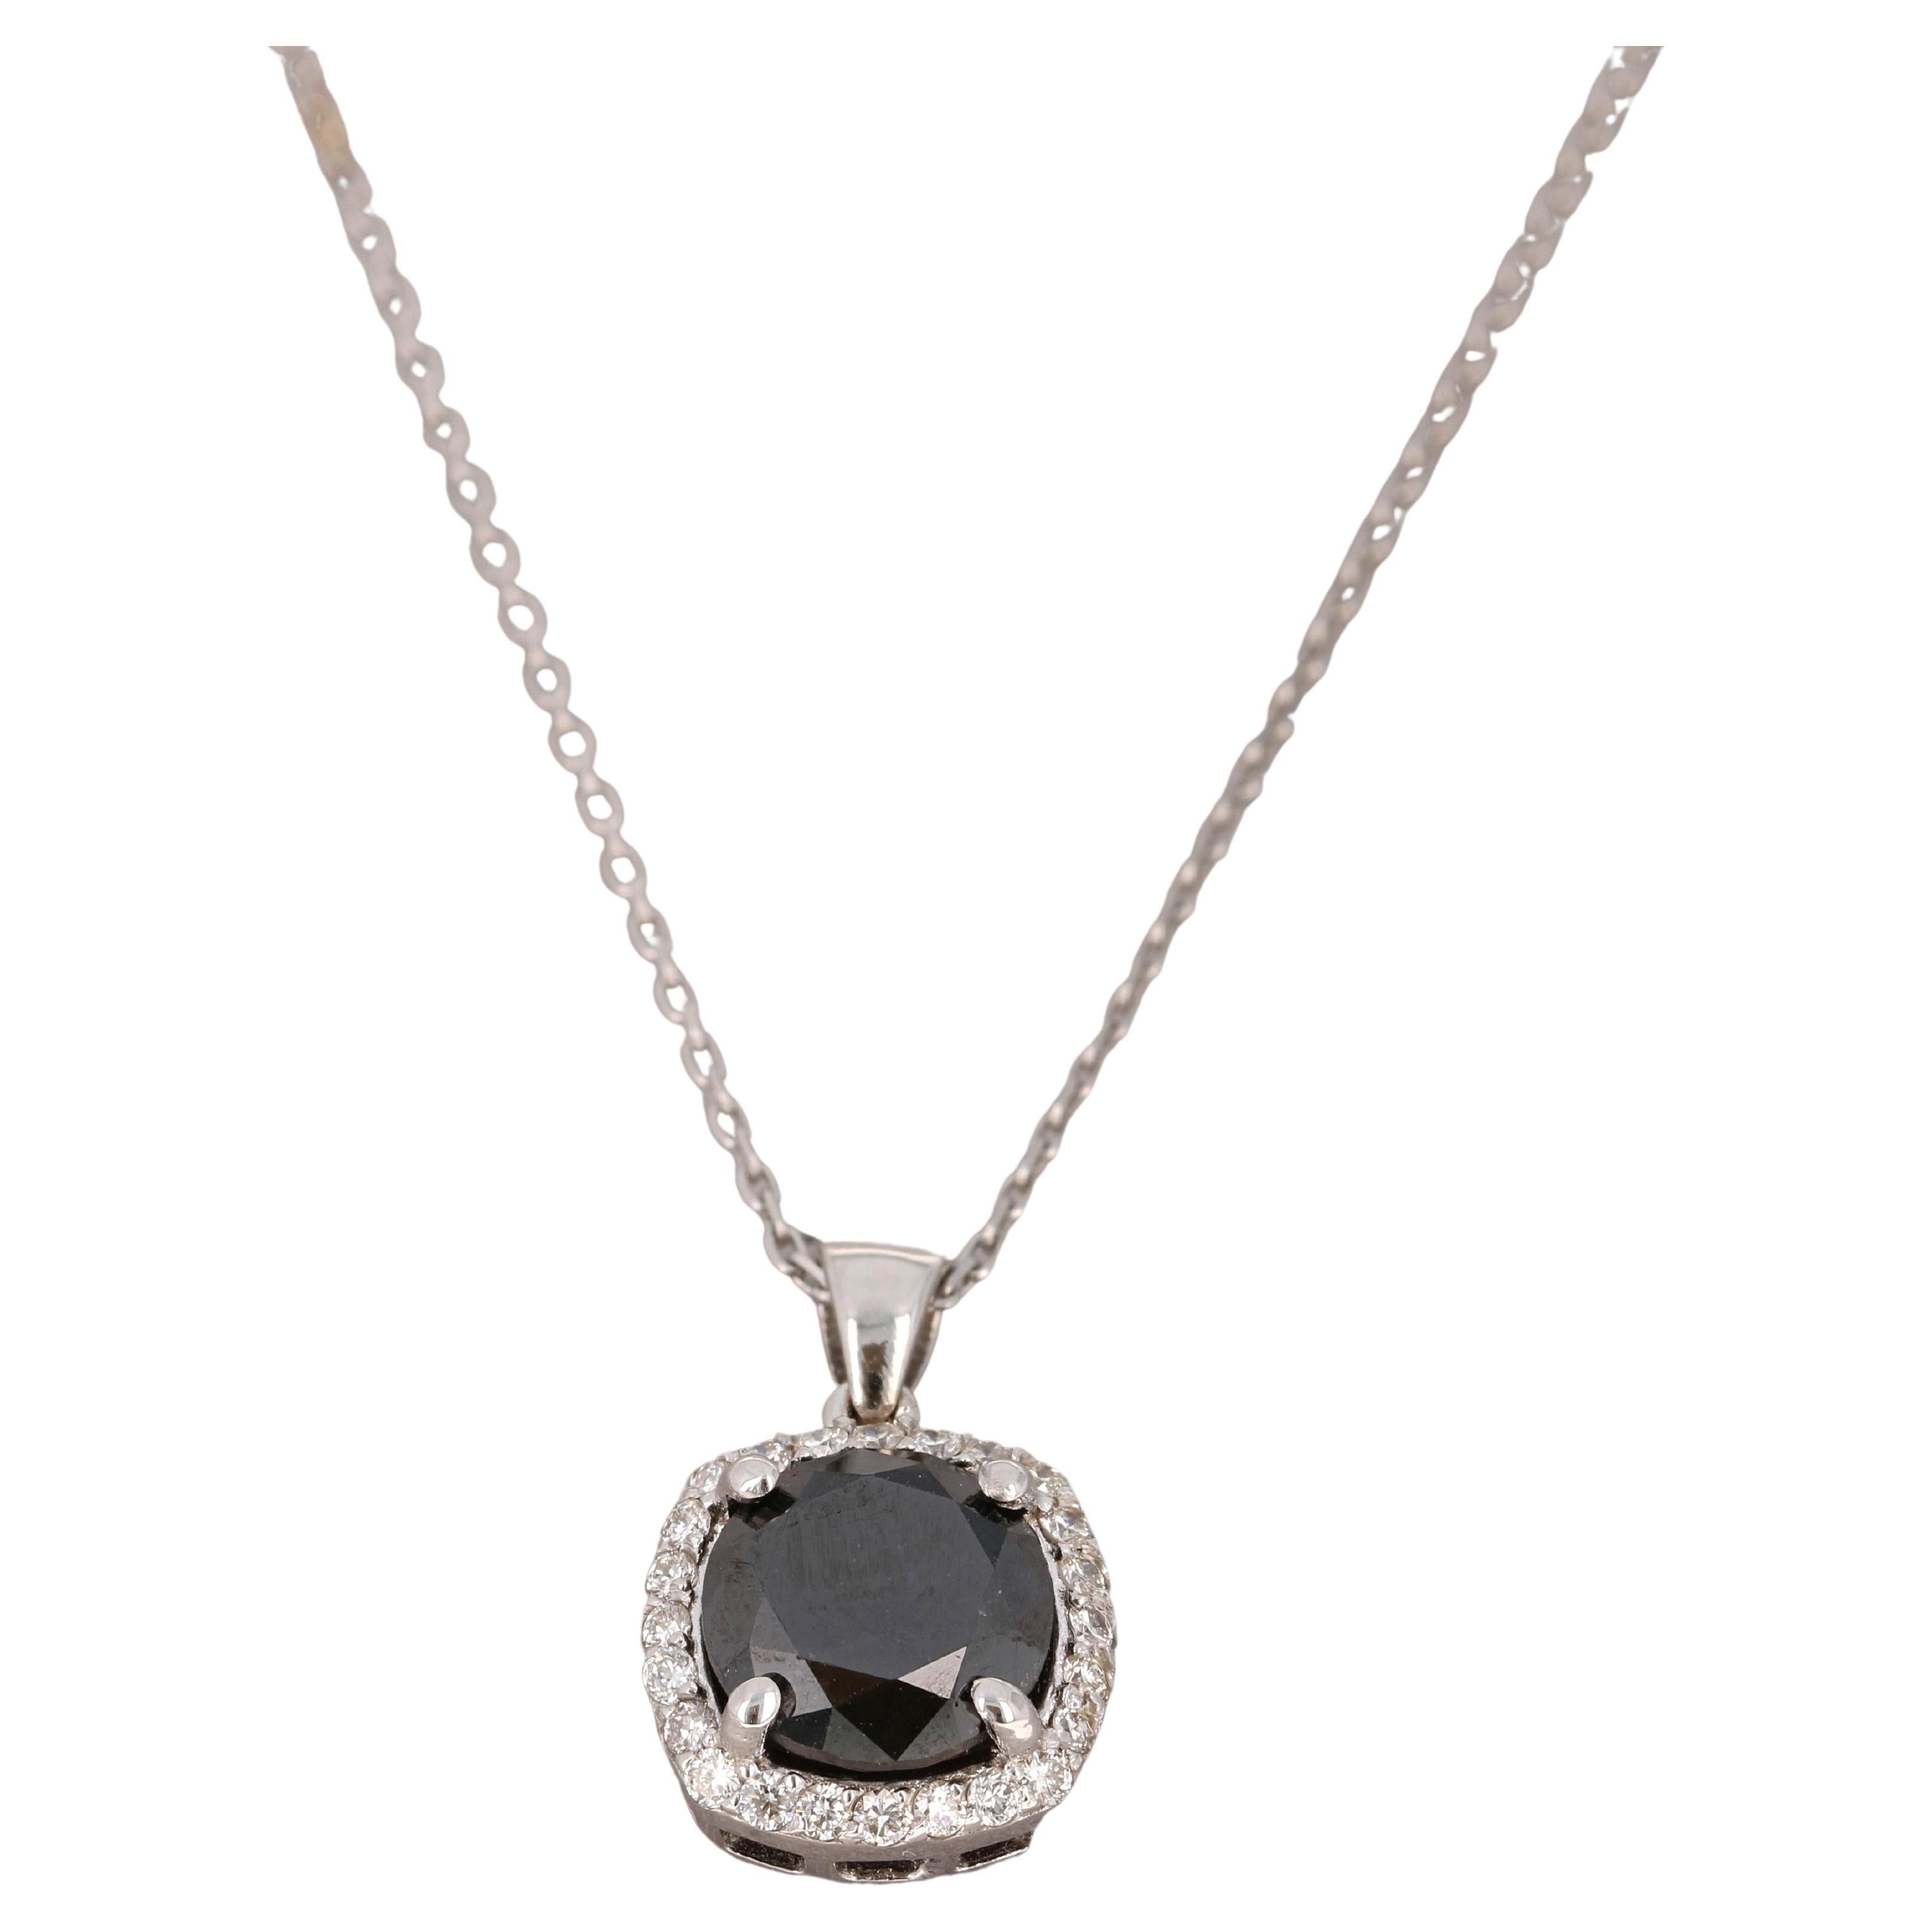 This pendant necklace has a Black Round Cut Diamond that weighs 2.63 Carats and 24 Round Cut Diamonds that weigh 0.23 Carats. (Clarity: VS, Color: H) The total carat weight of the pendant is 2.83 Carats. The black diamond measures 8.5 mm. 
Curated